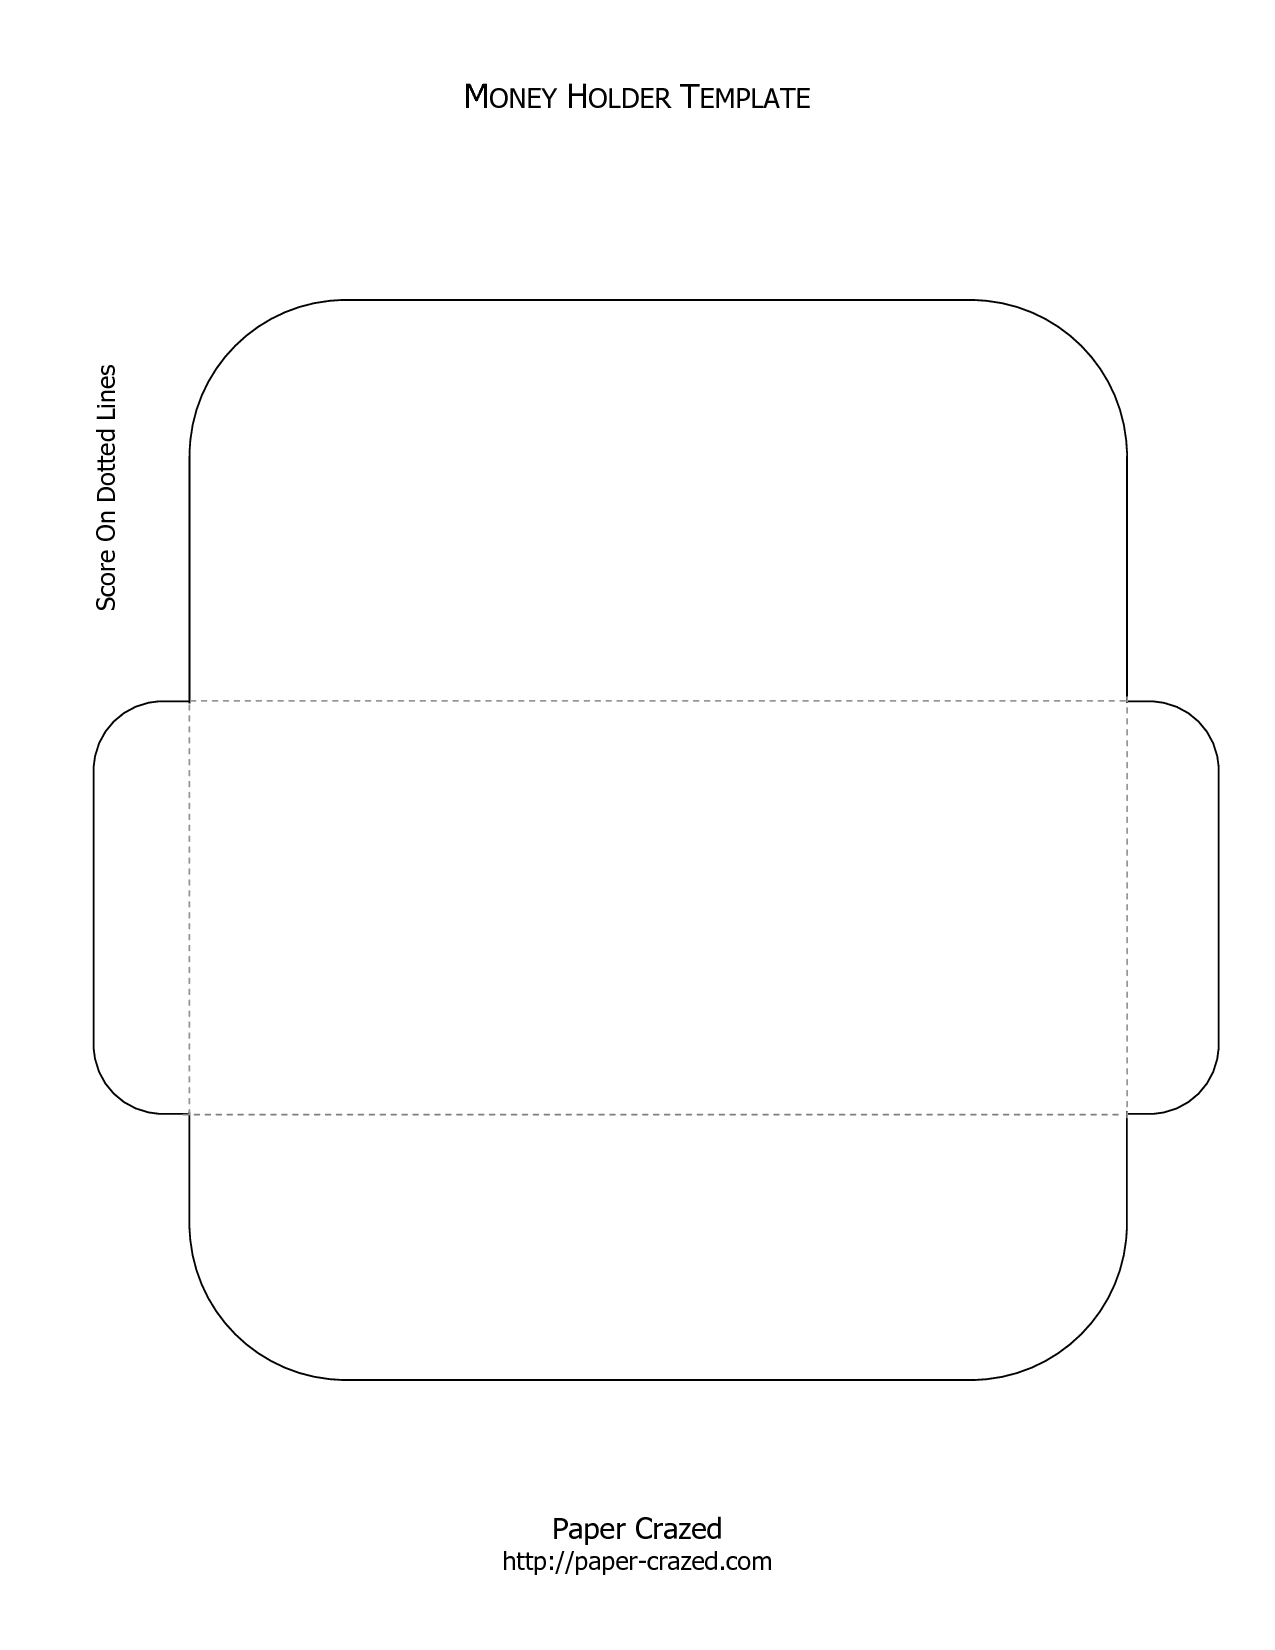 008 Gift Card Envelope Template Ideas Wondrous Diy Voucher Pertaining To Envelope Templates For Card Making